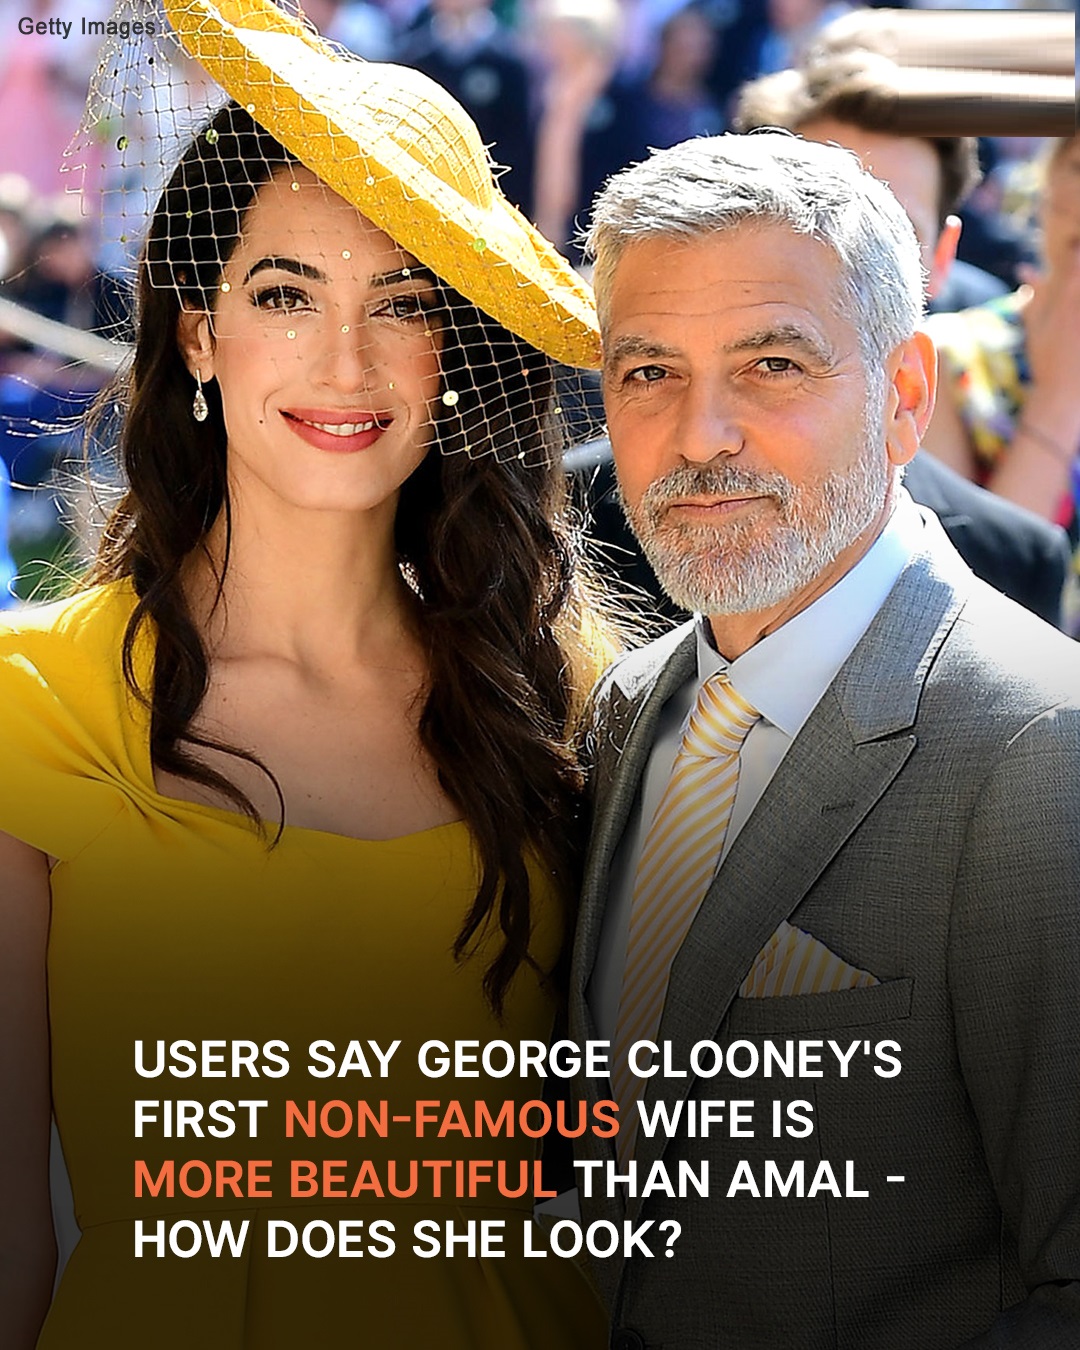 George Clooney Refused to Marry Again after His Short-Lived Marriage: What to Know About His Ex?